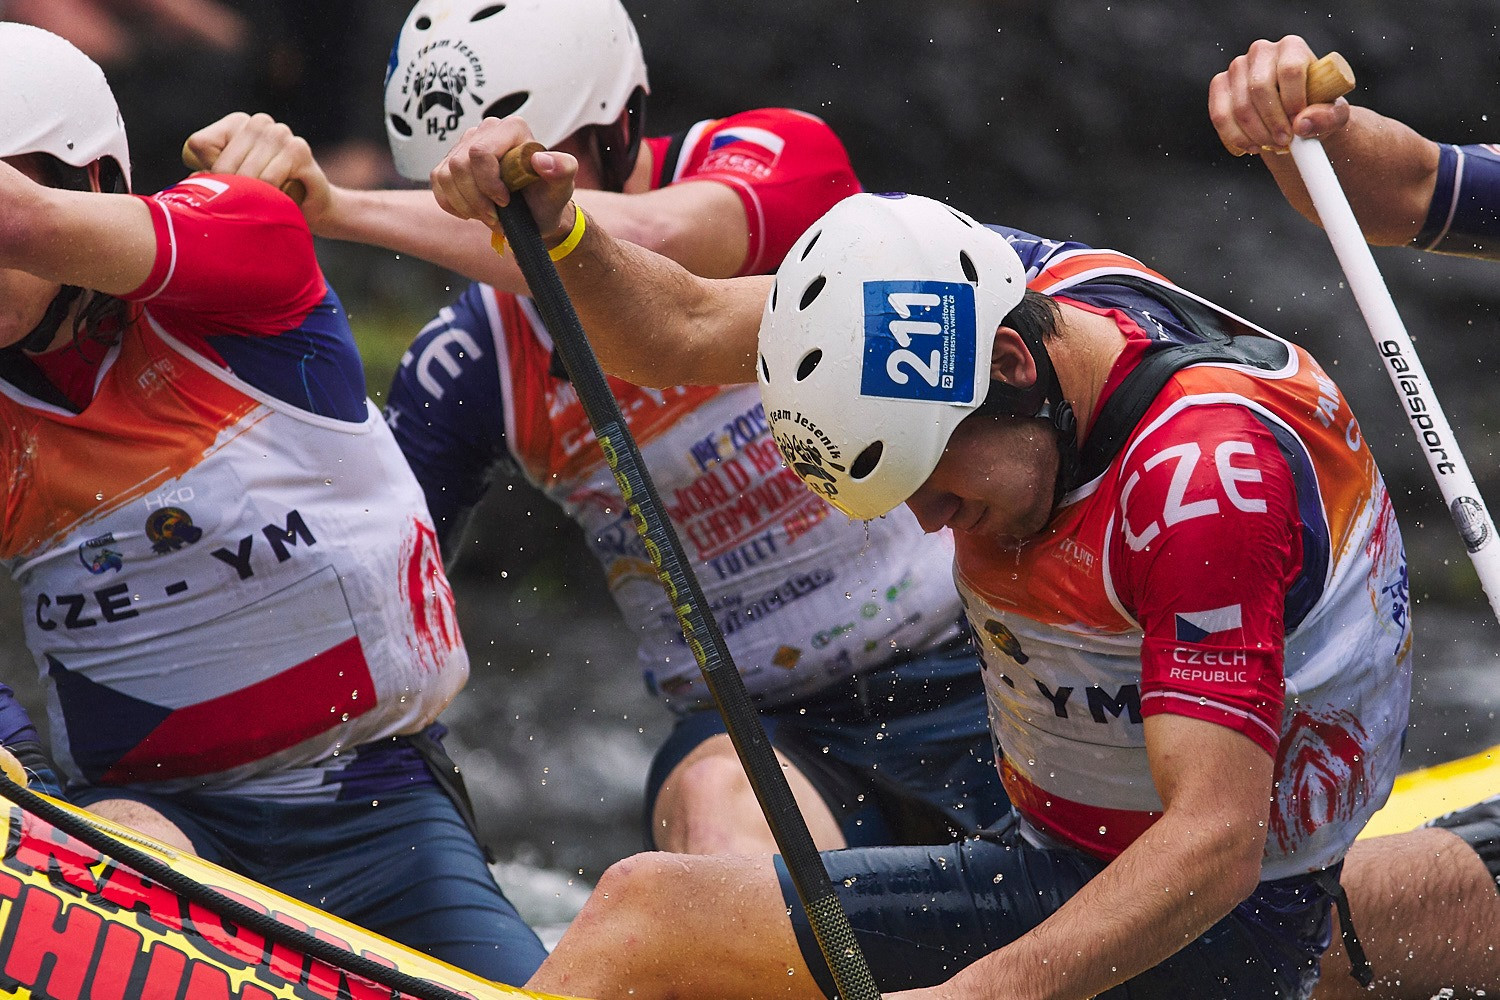 Brazil and Czech Republic claim top spots at 2022 World Rafting Championships